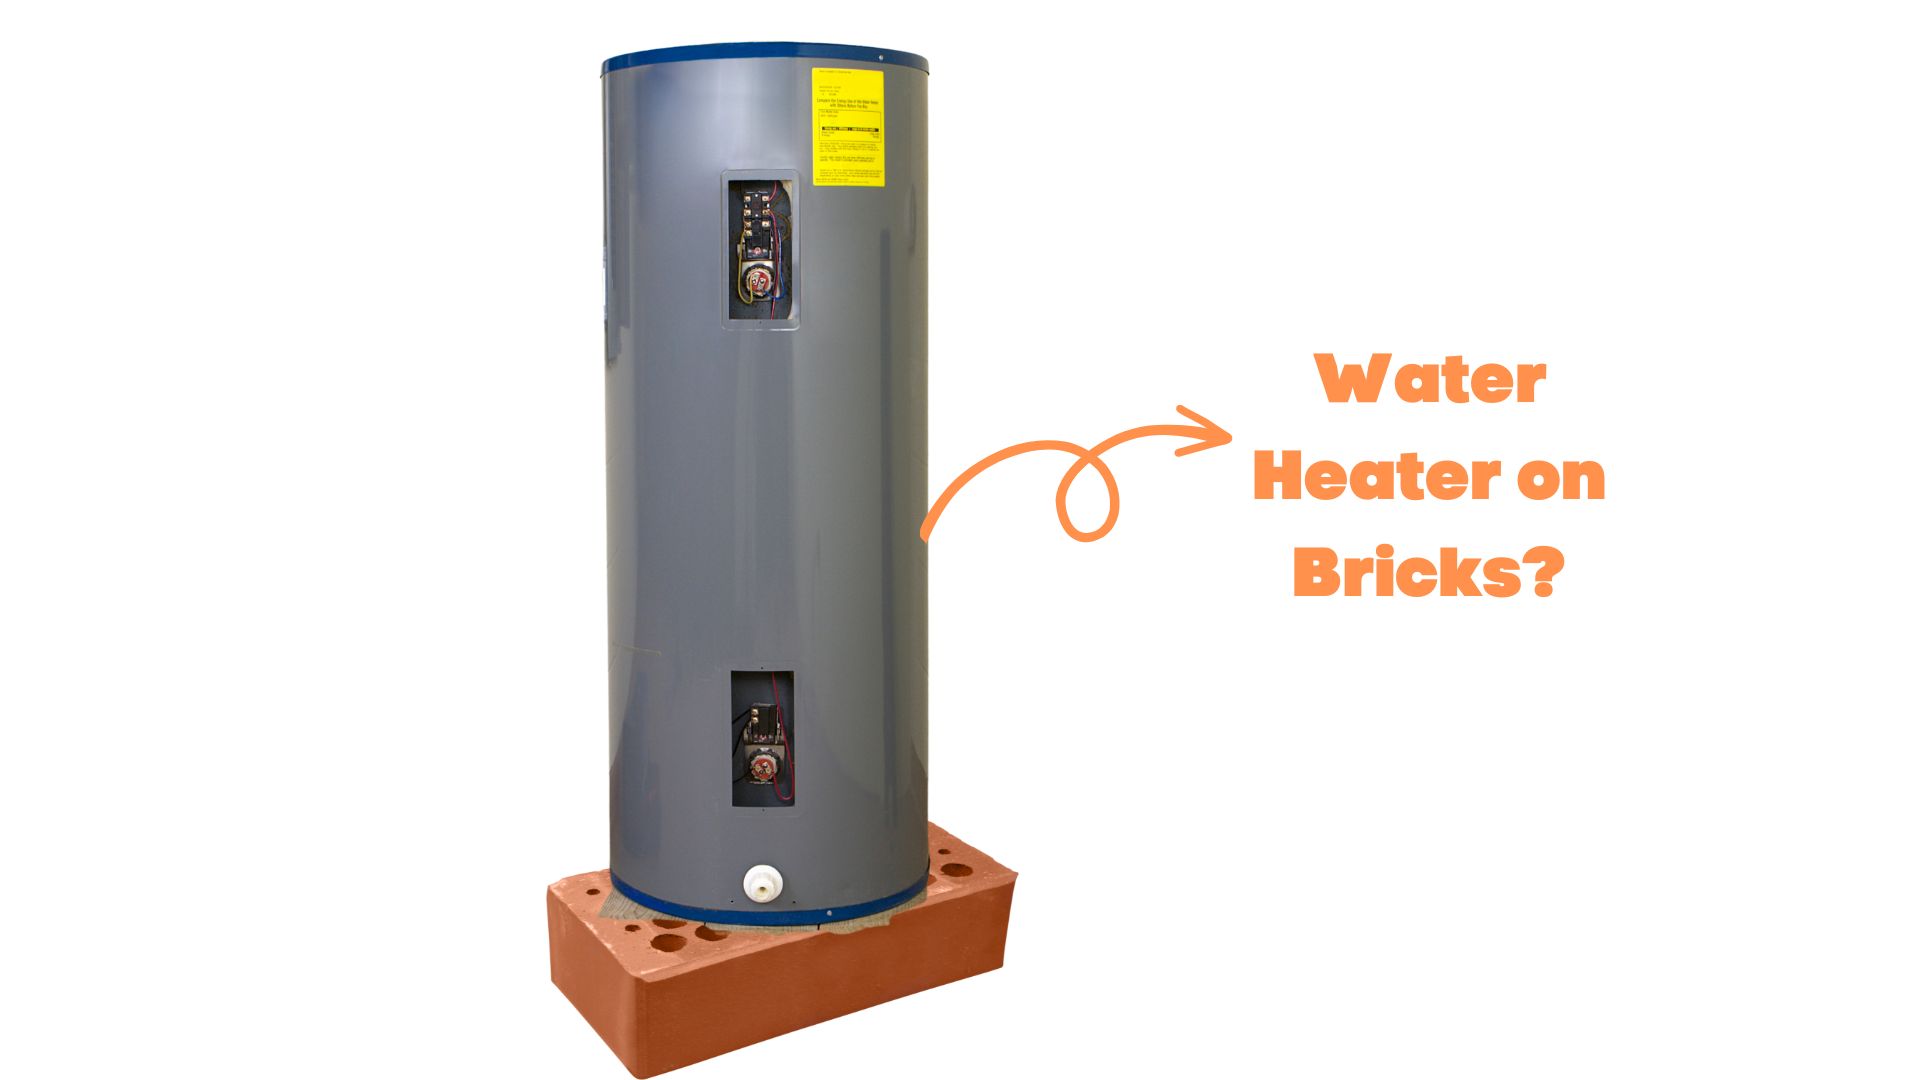 can you put water heater on bricks